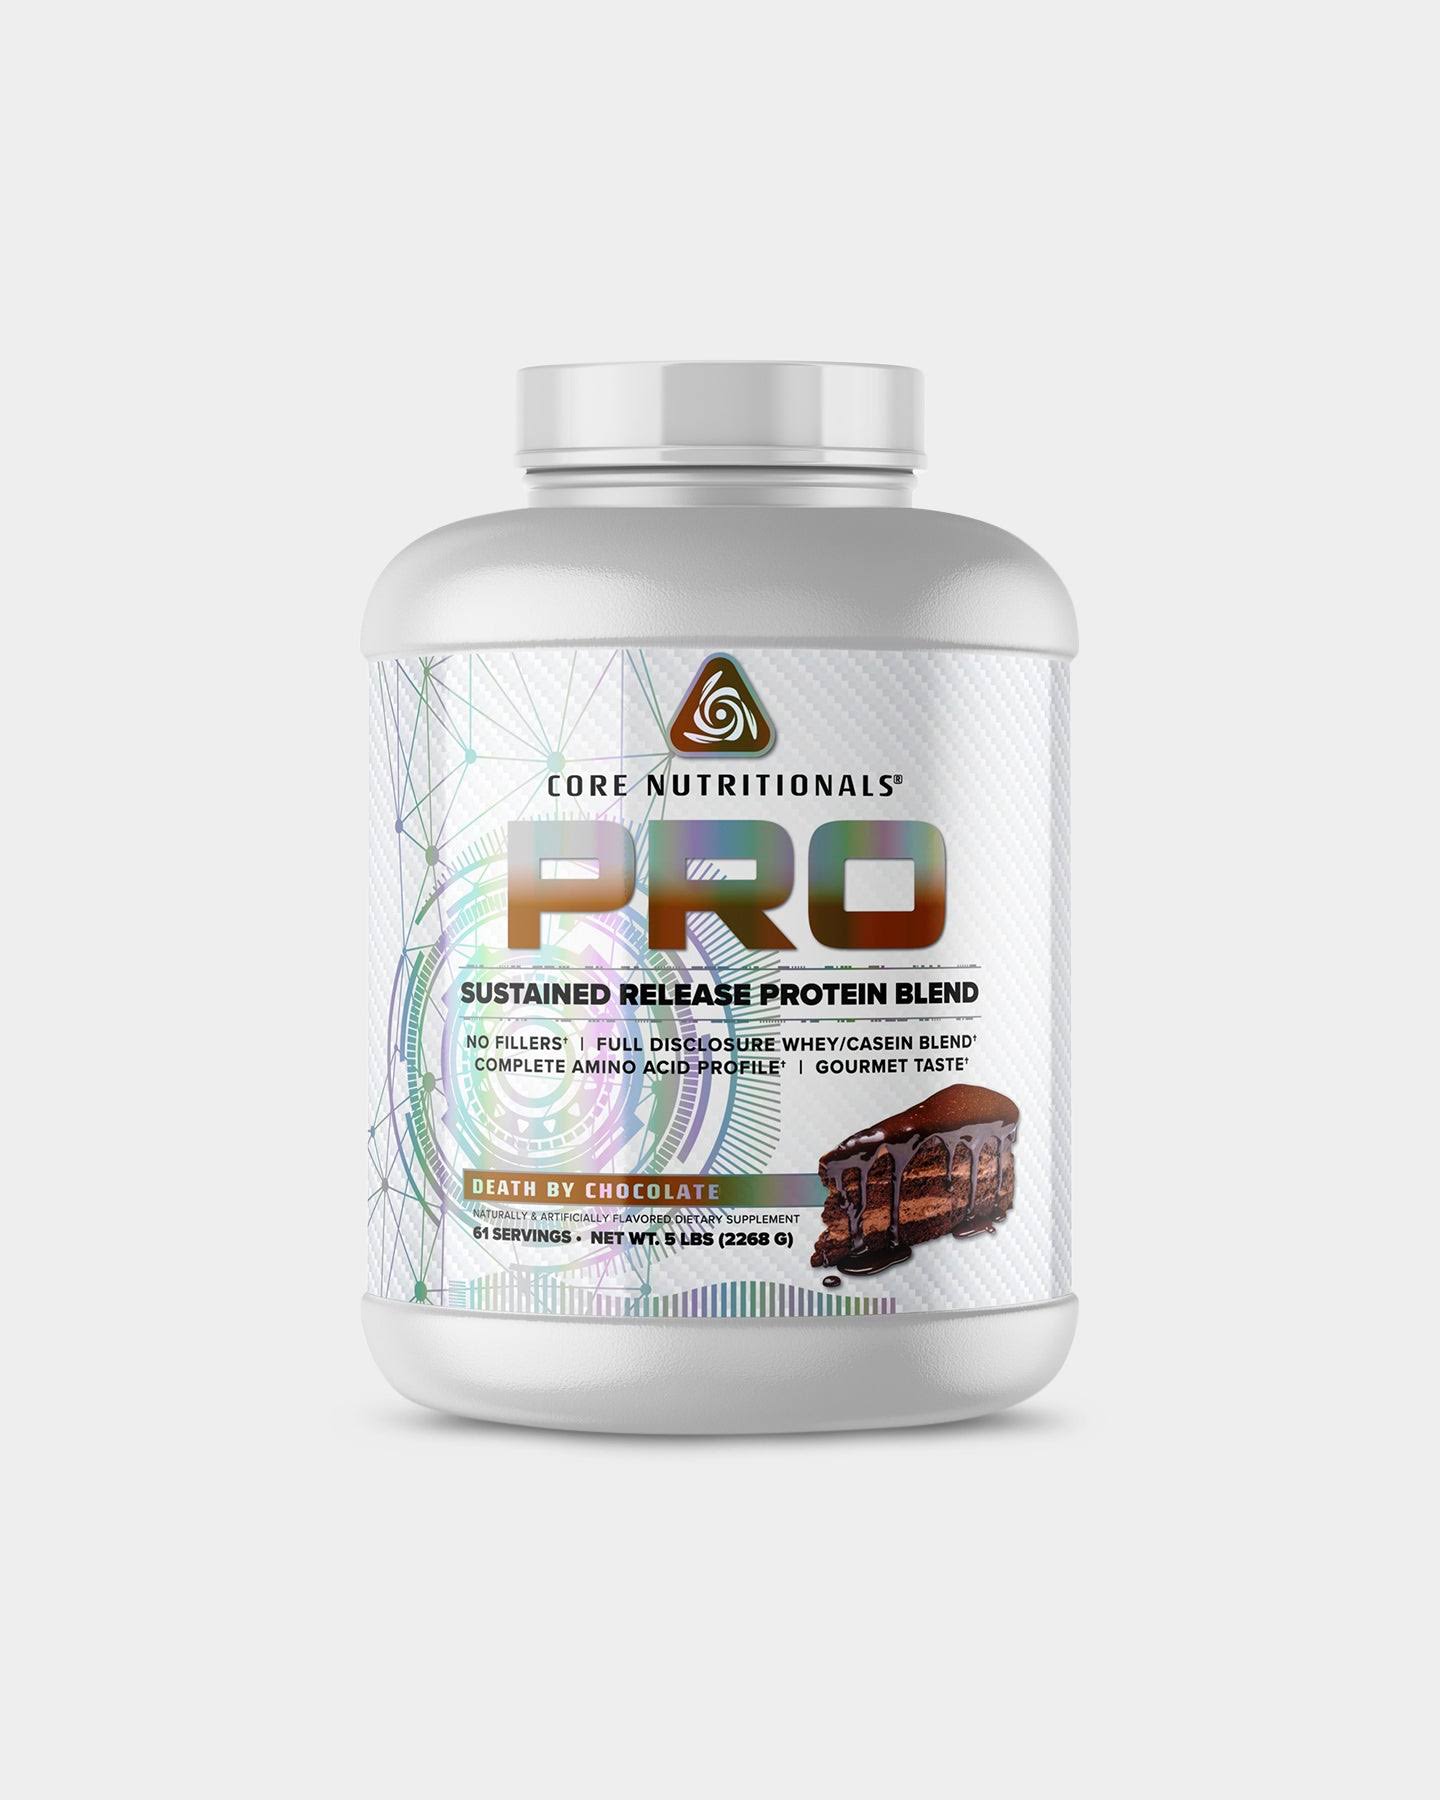 Core Nutritionals - Pro - 5lb Death by Chocolate